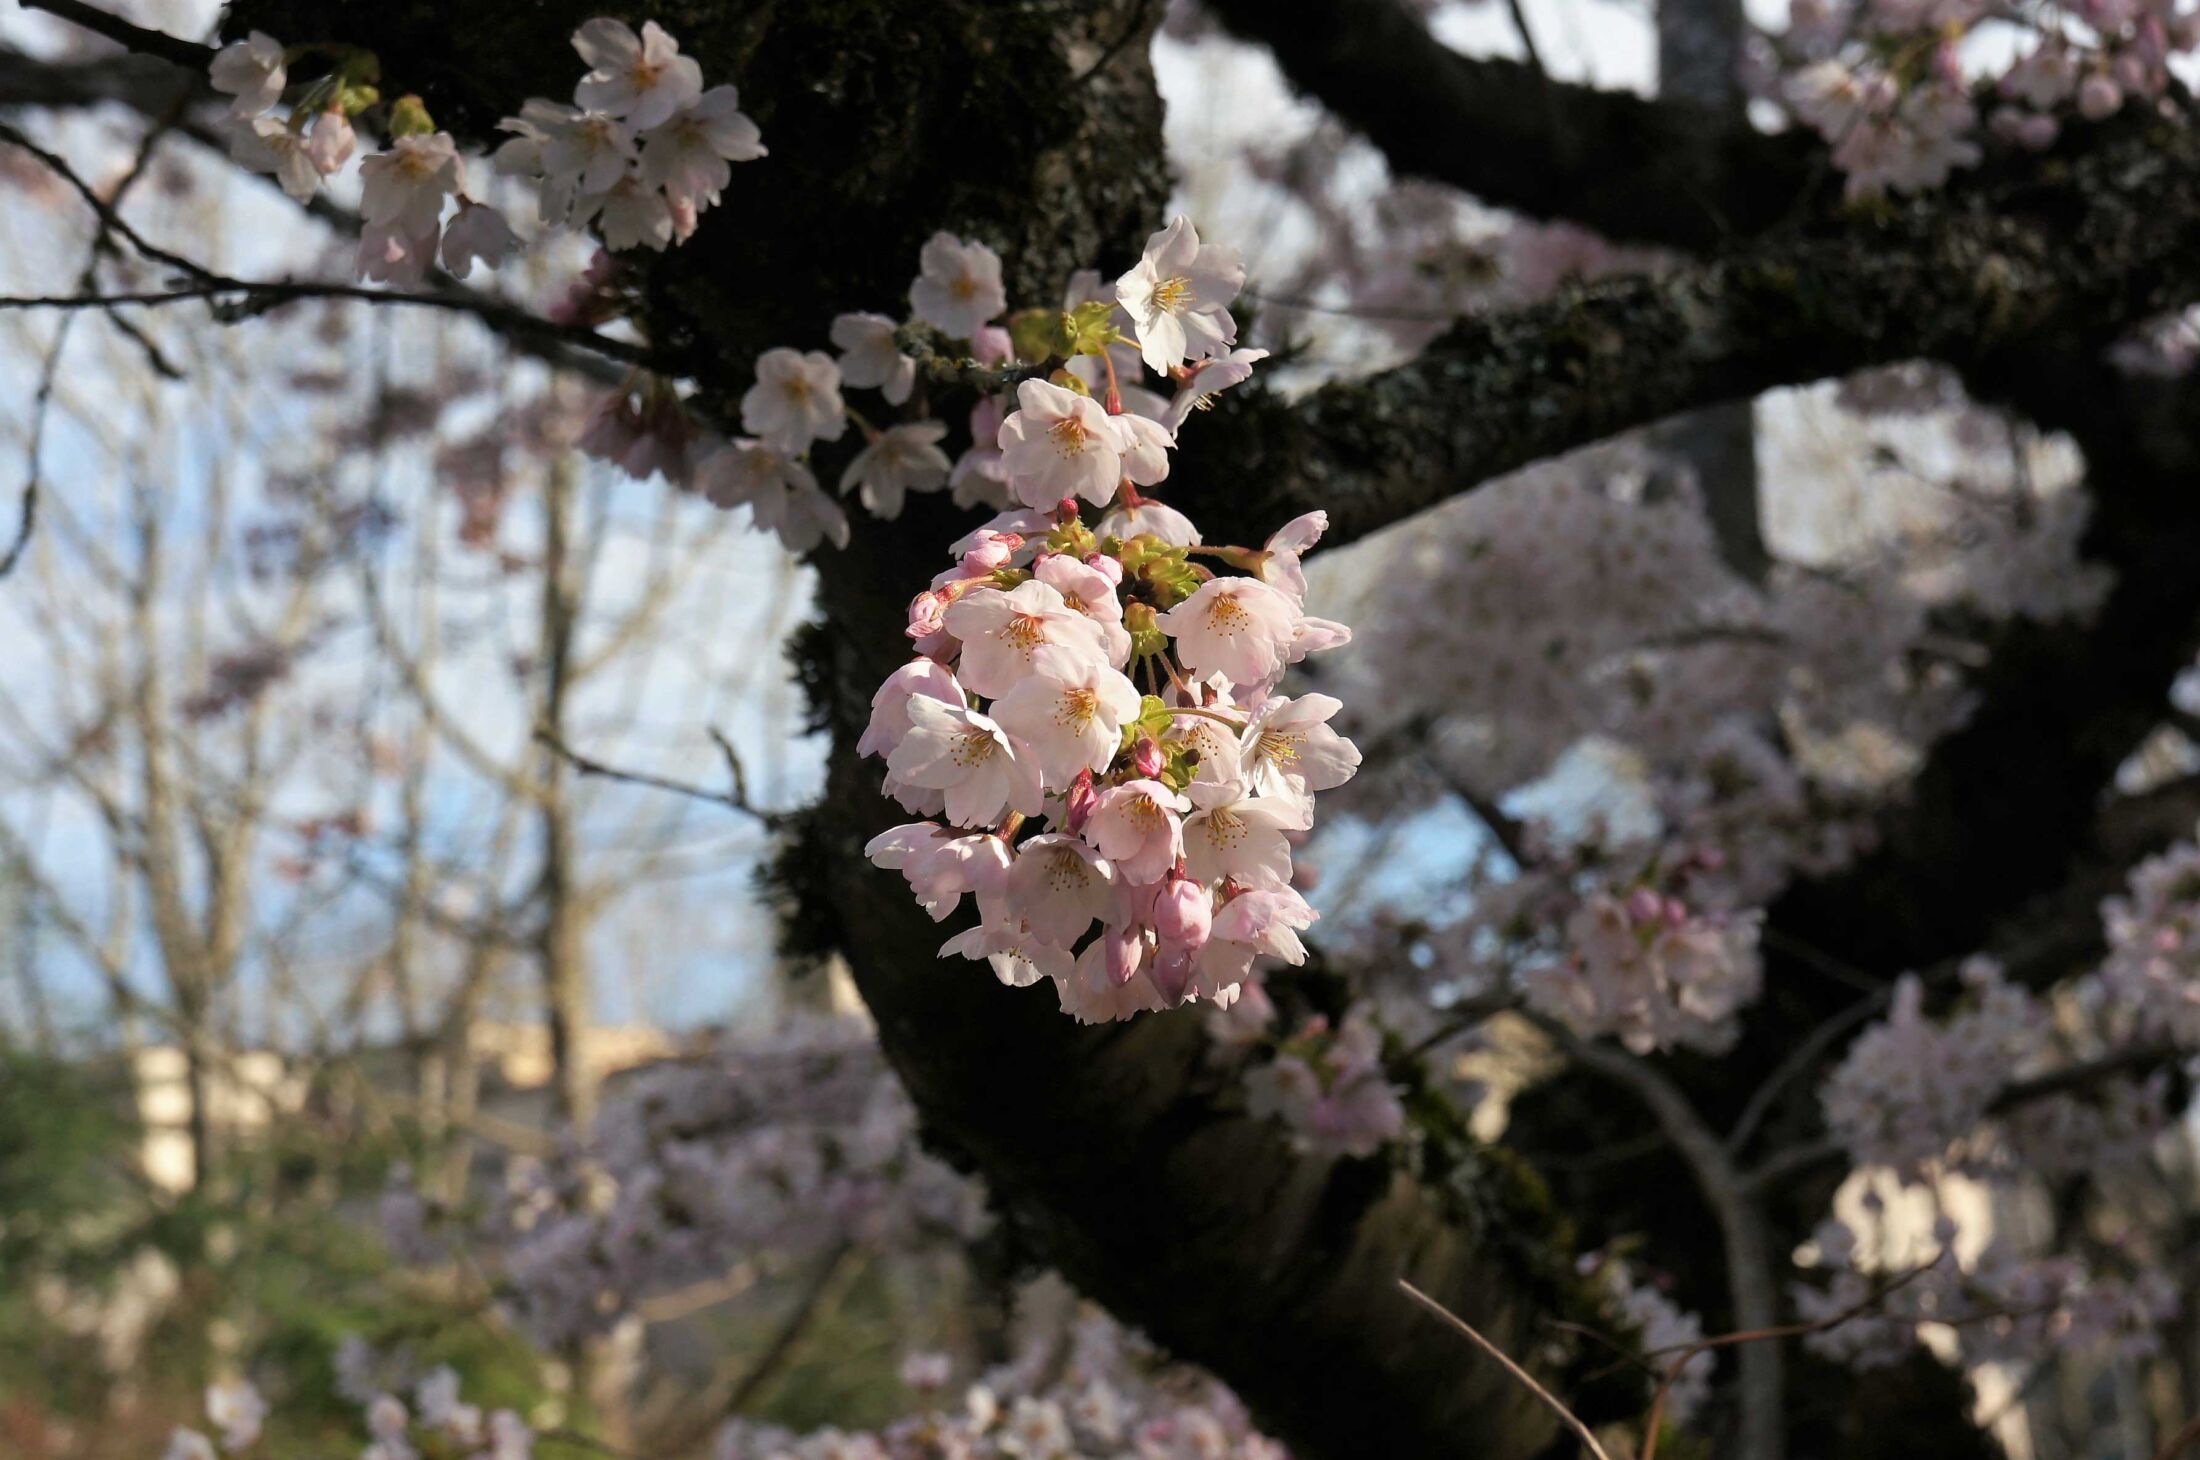 A cluster of blossoms on a cherry tree